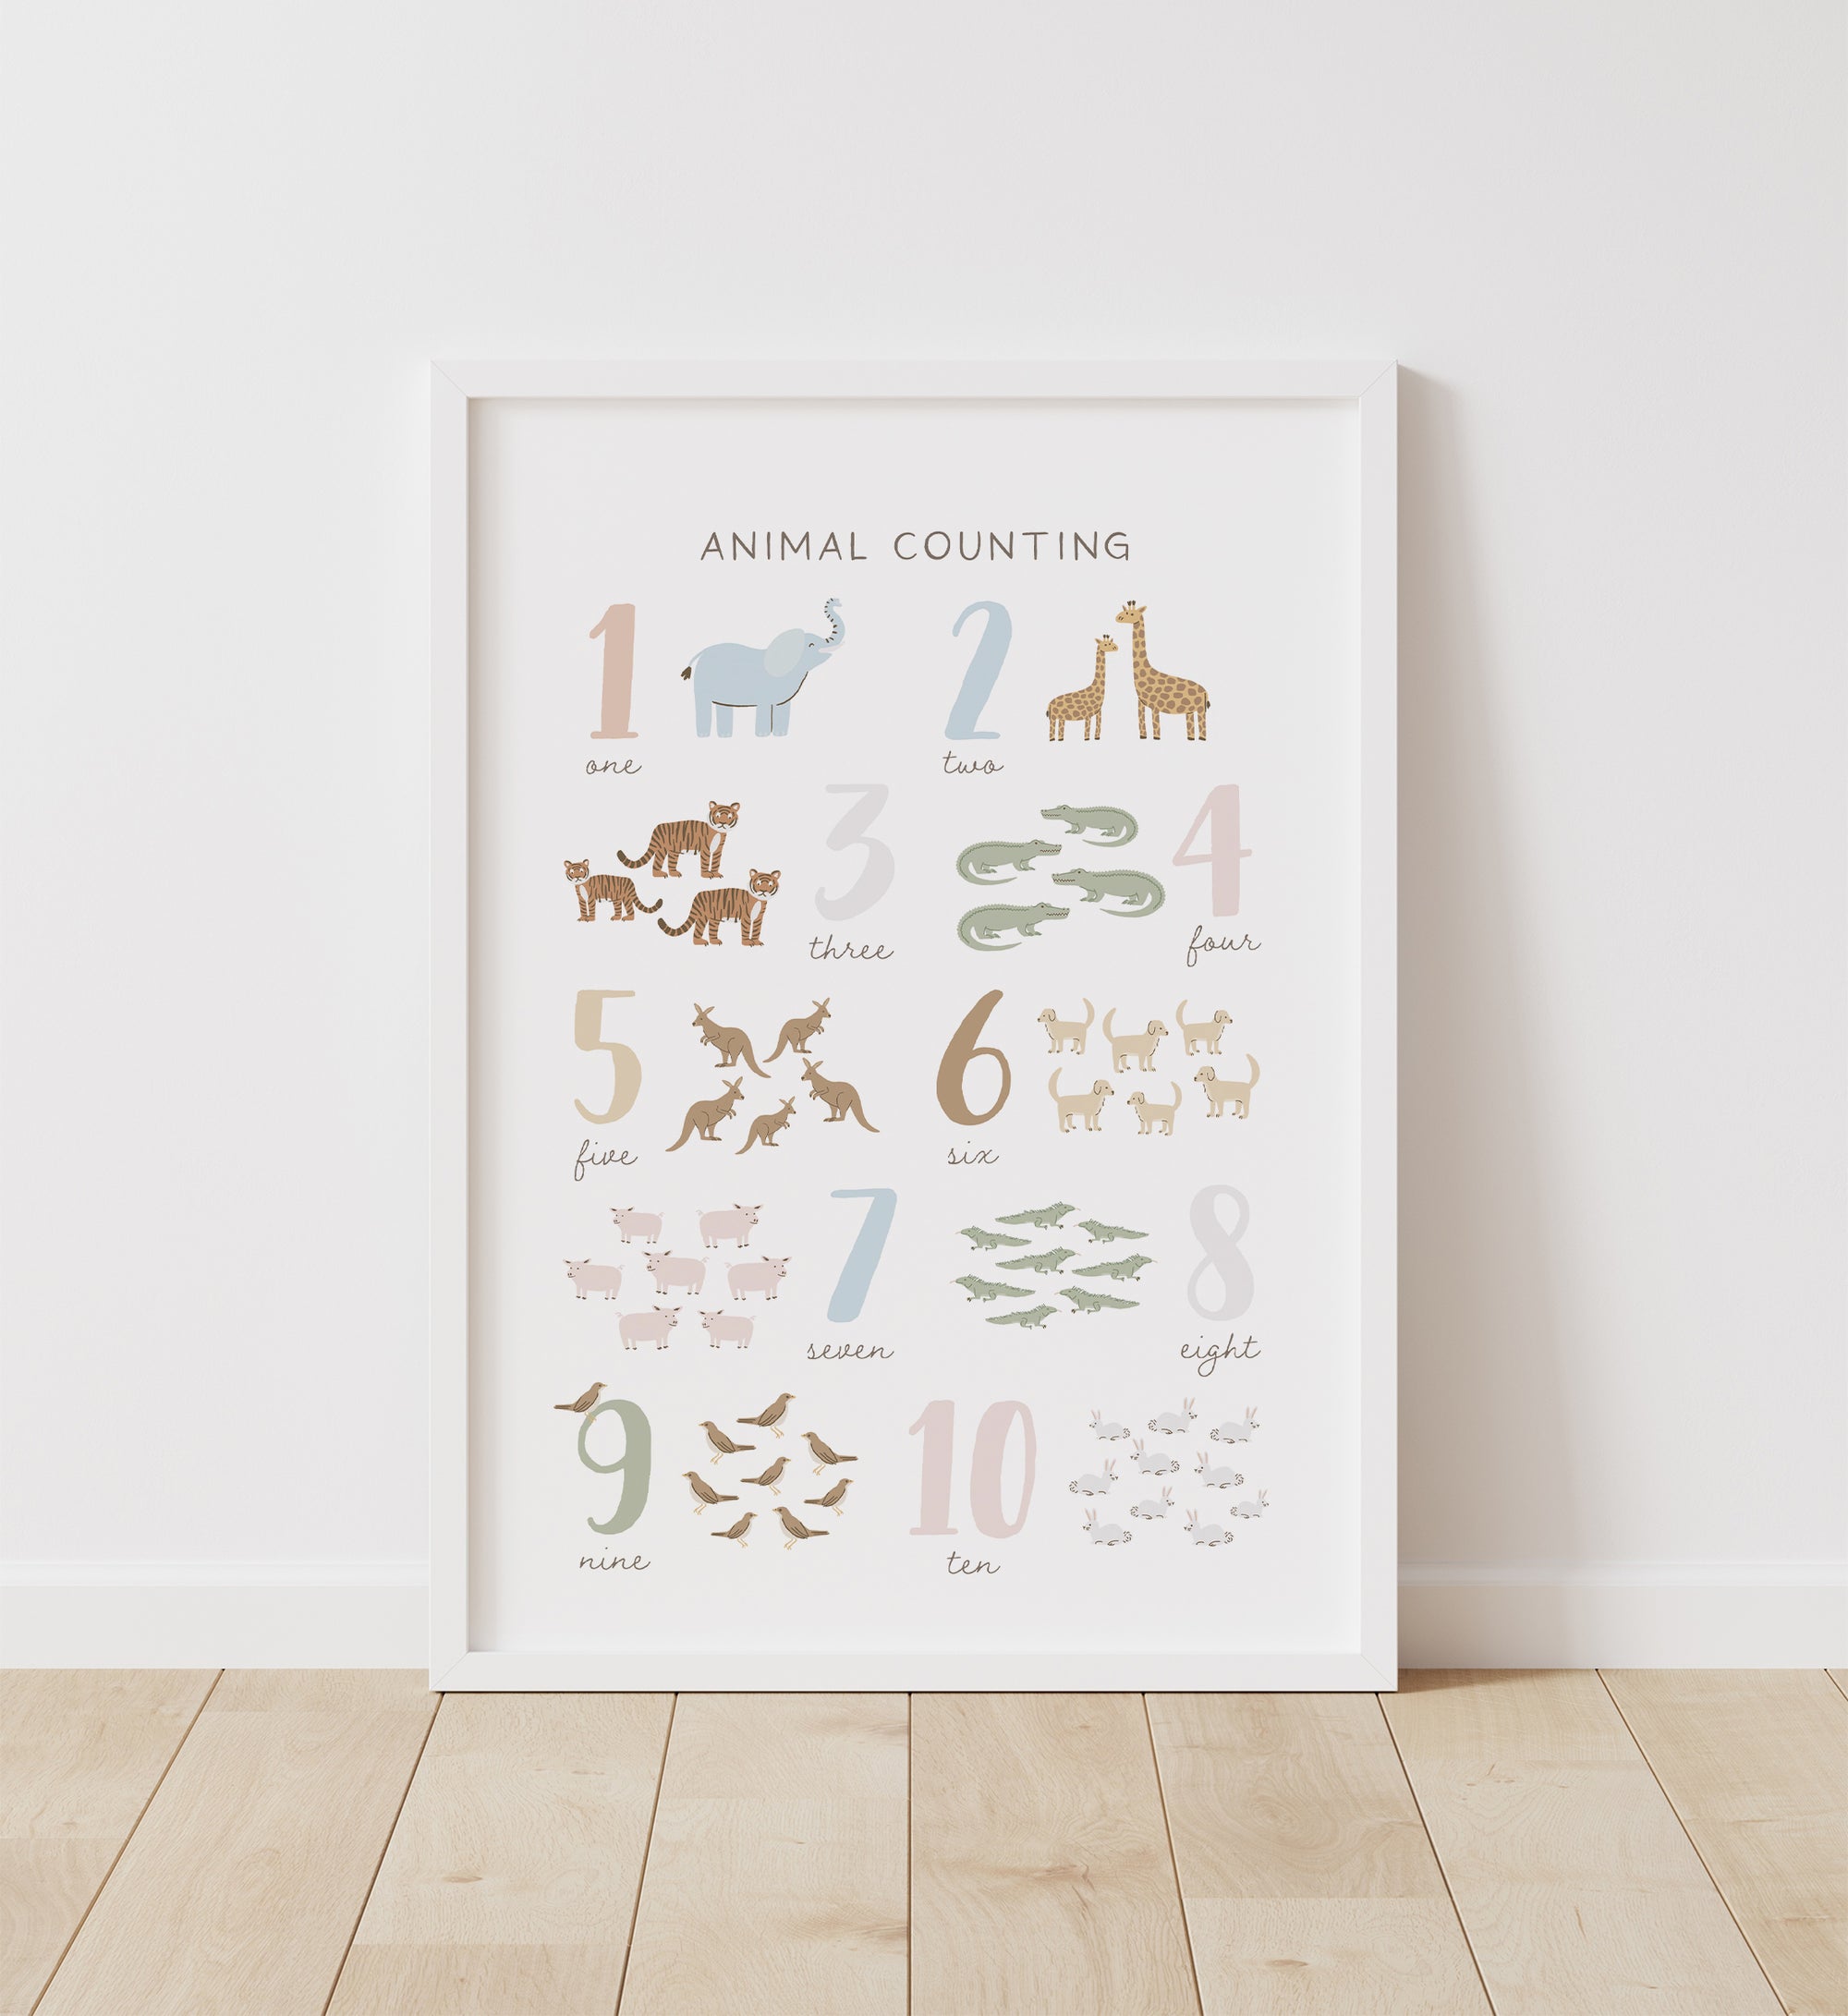 Animal Counting Print - SNCP